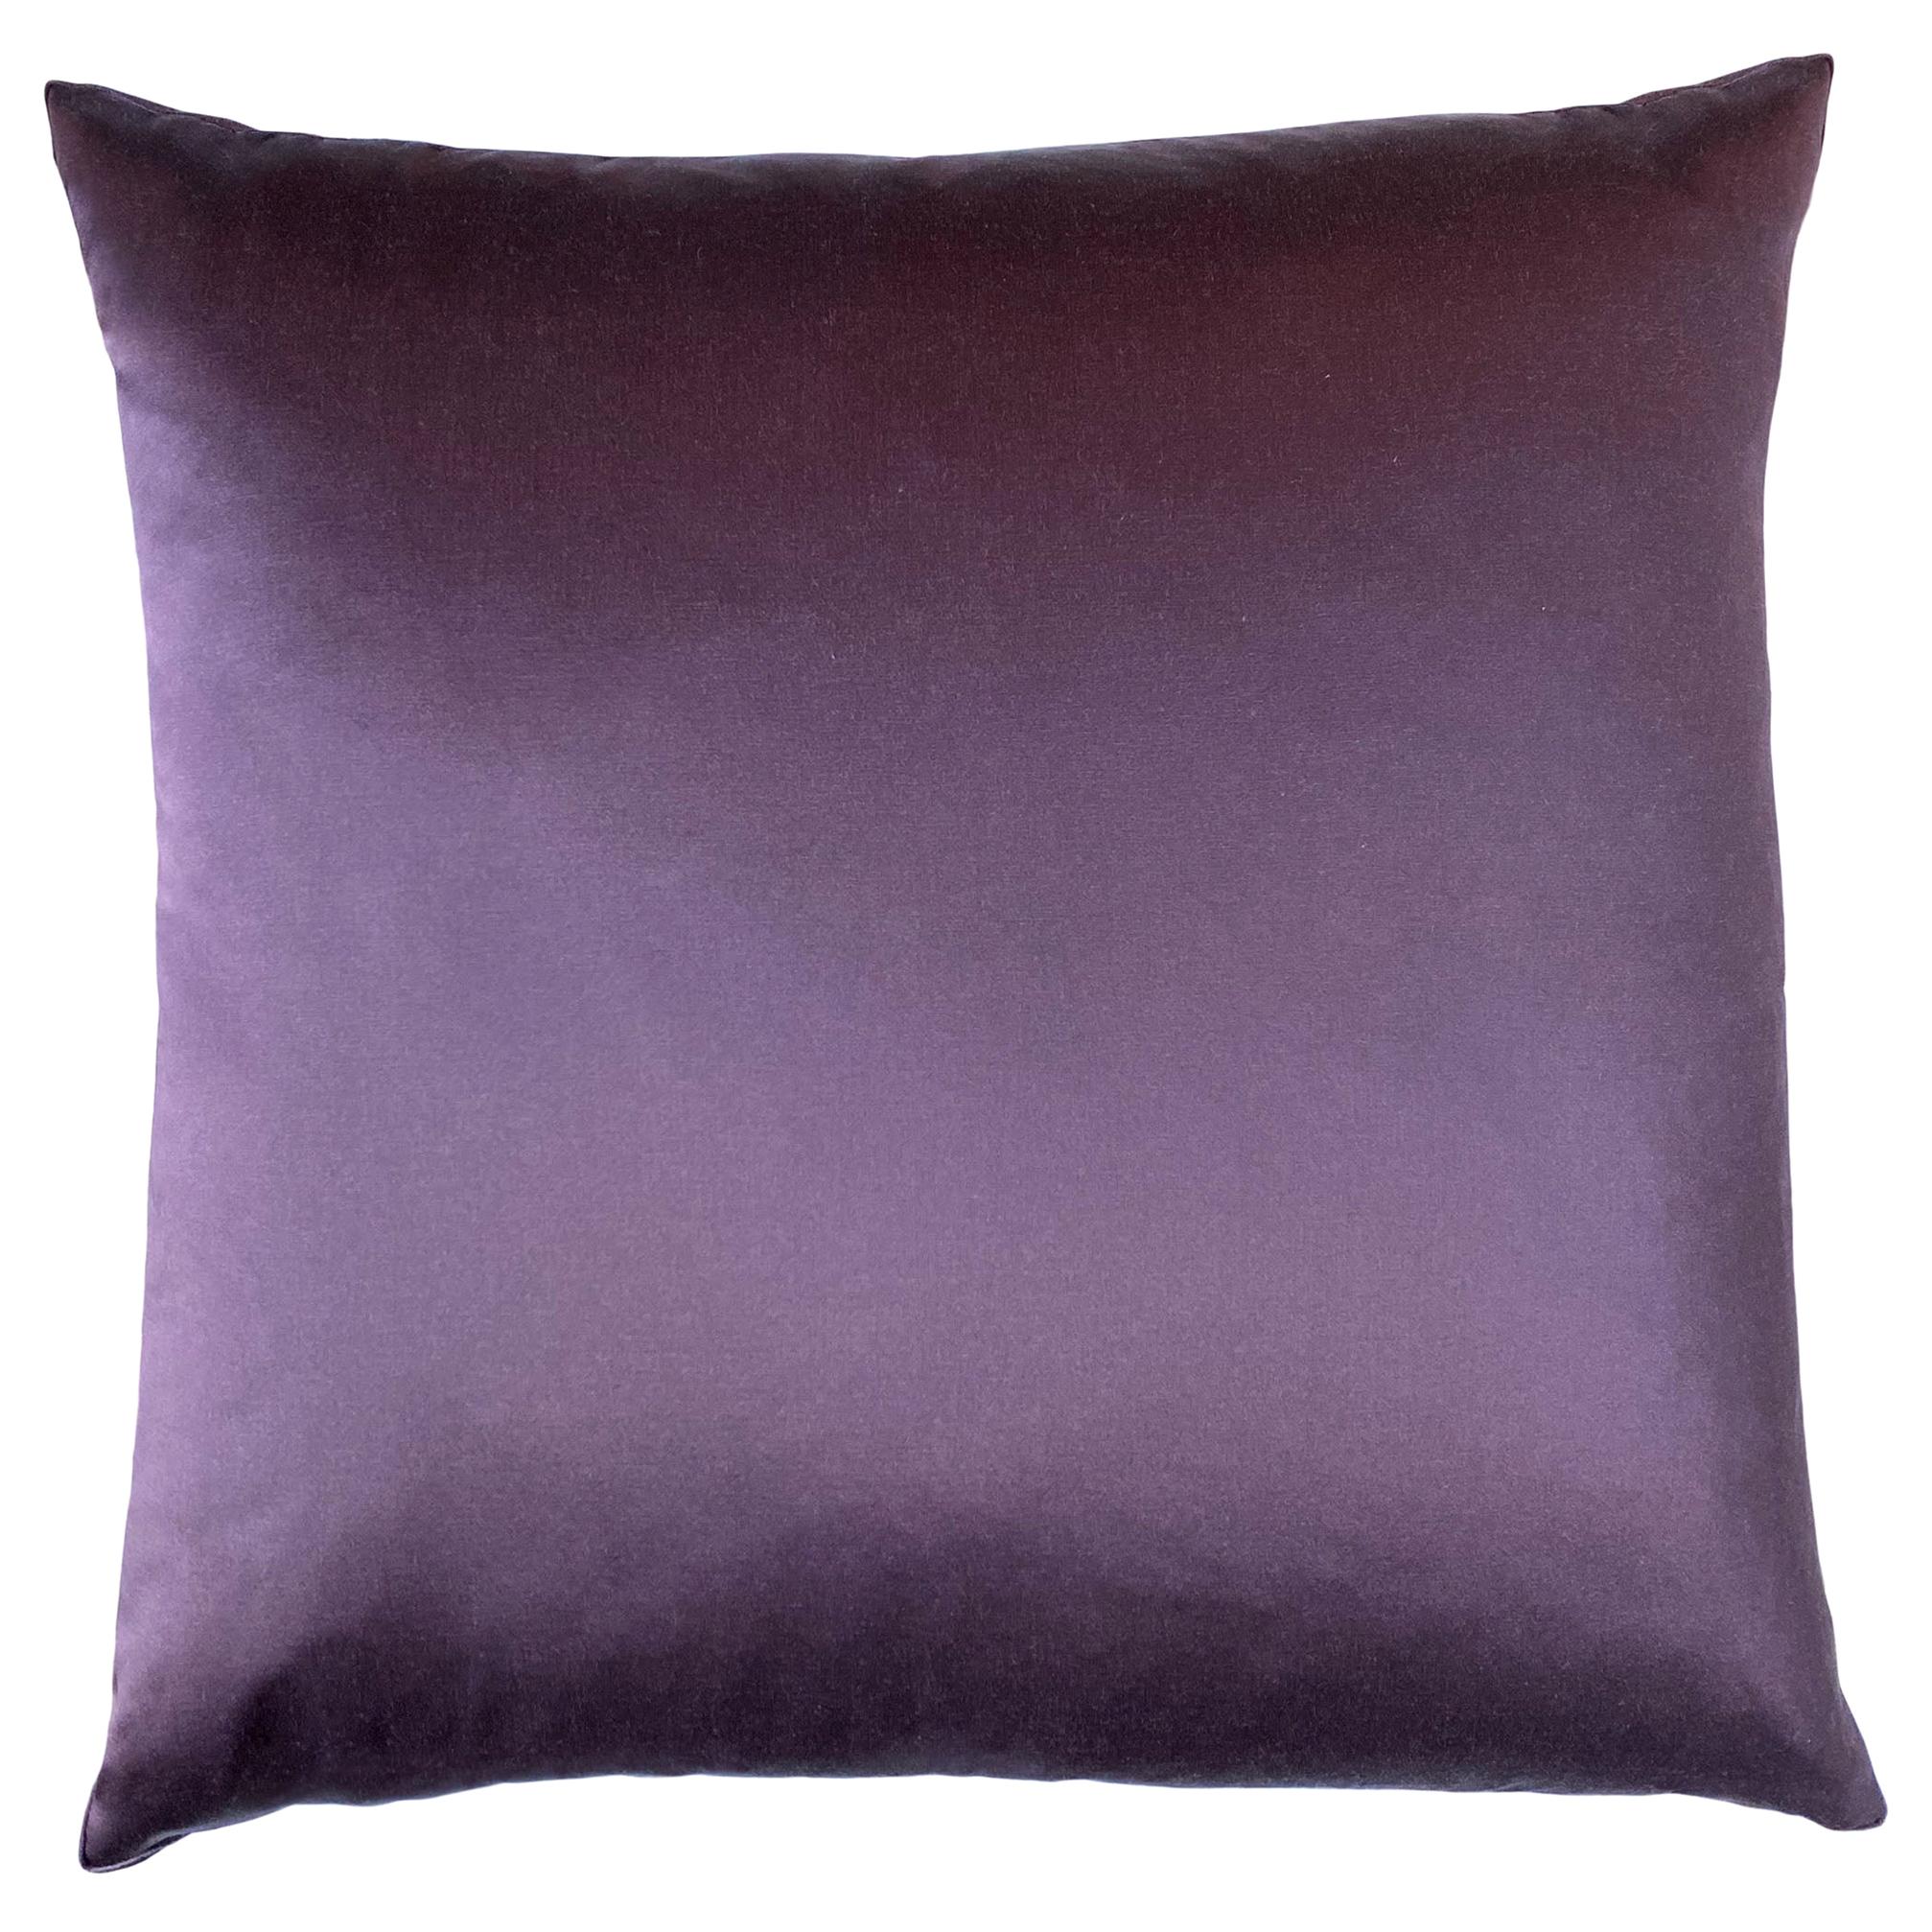 Handcrafted Lustrous Fabric Subtle Sheen Square Box Pillow Hypoallergenic For Sale